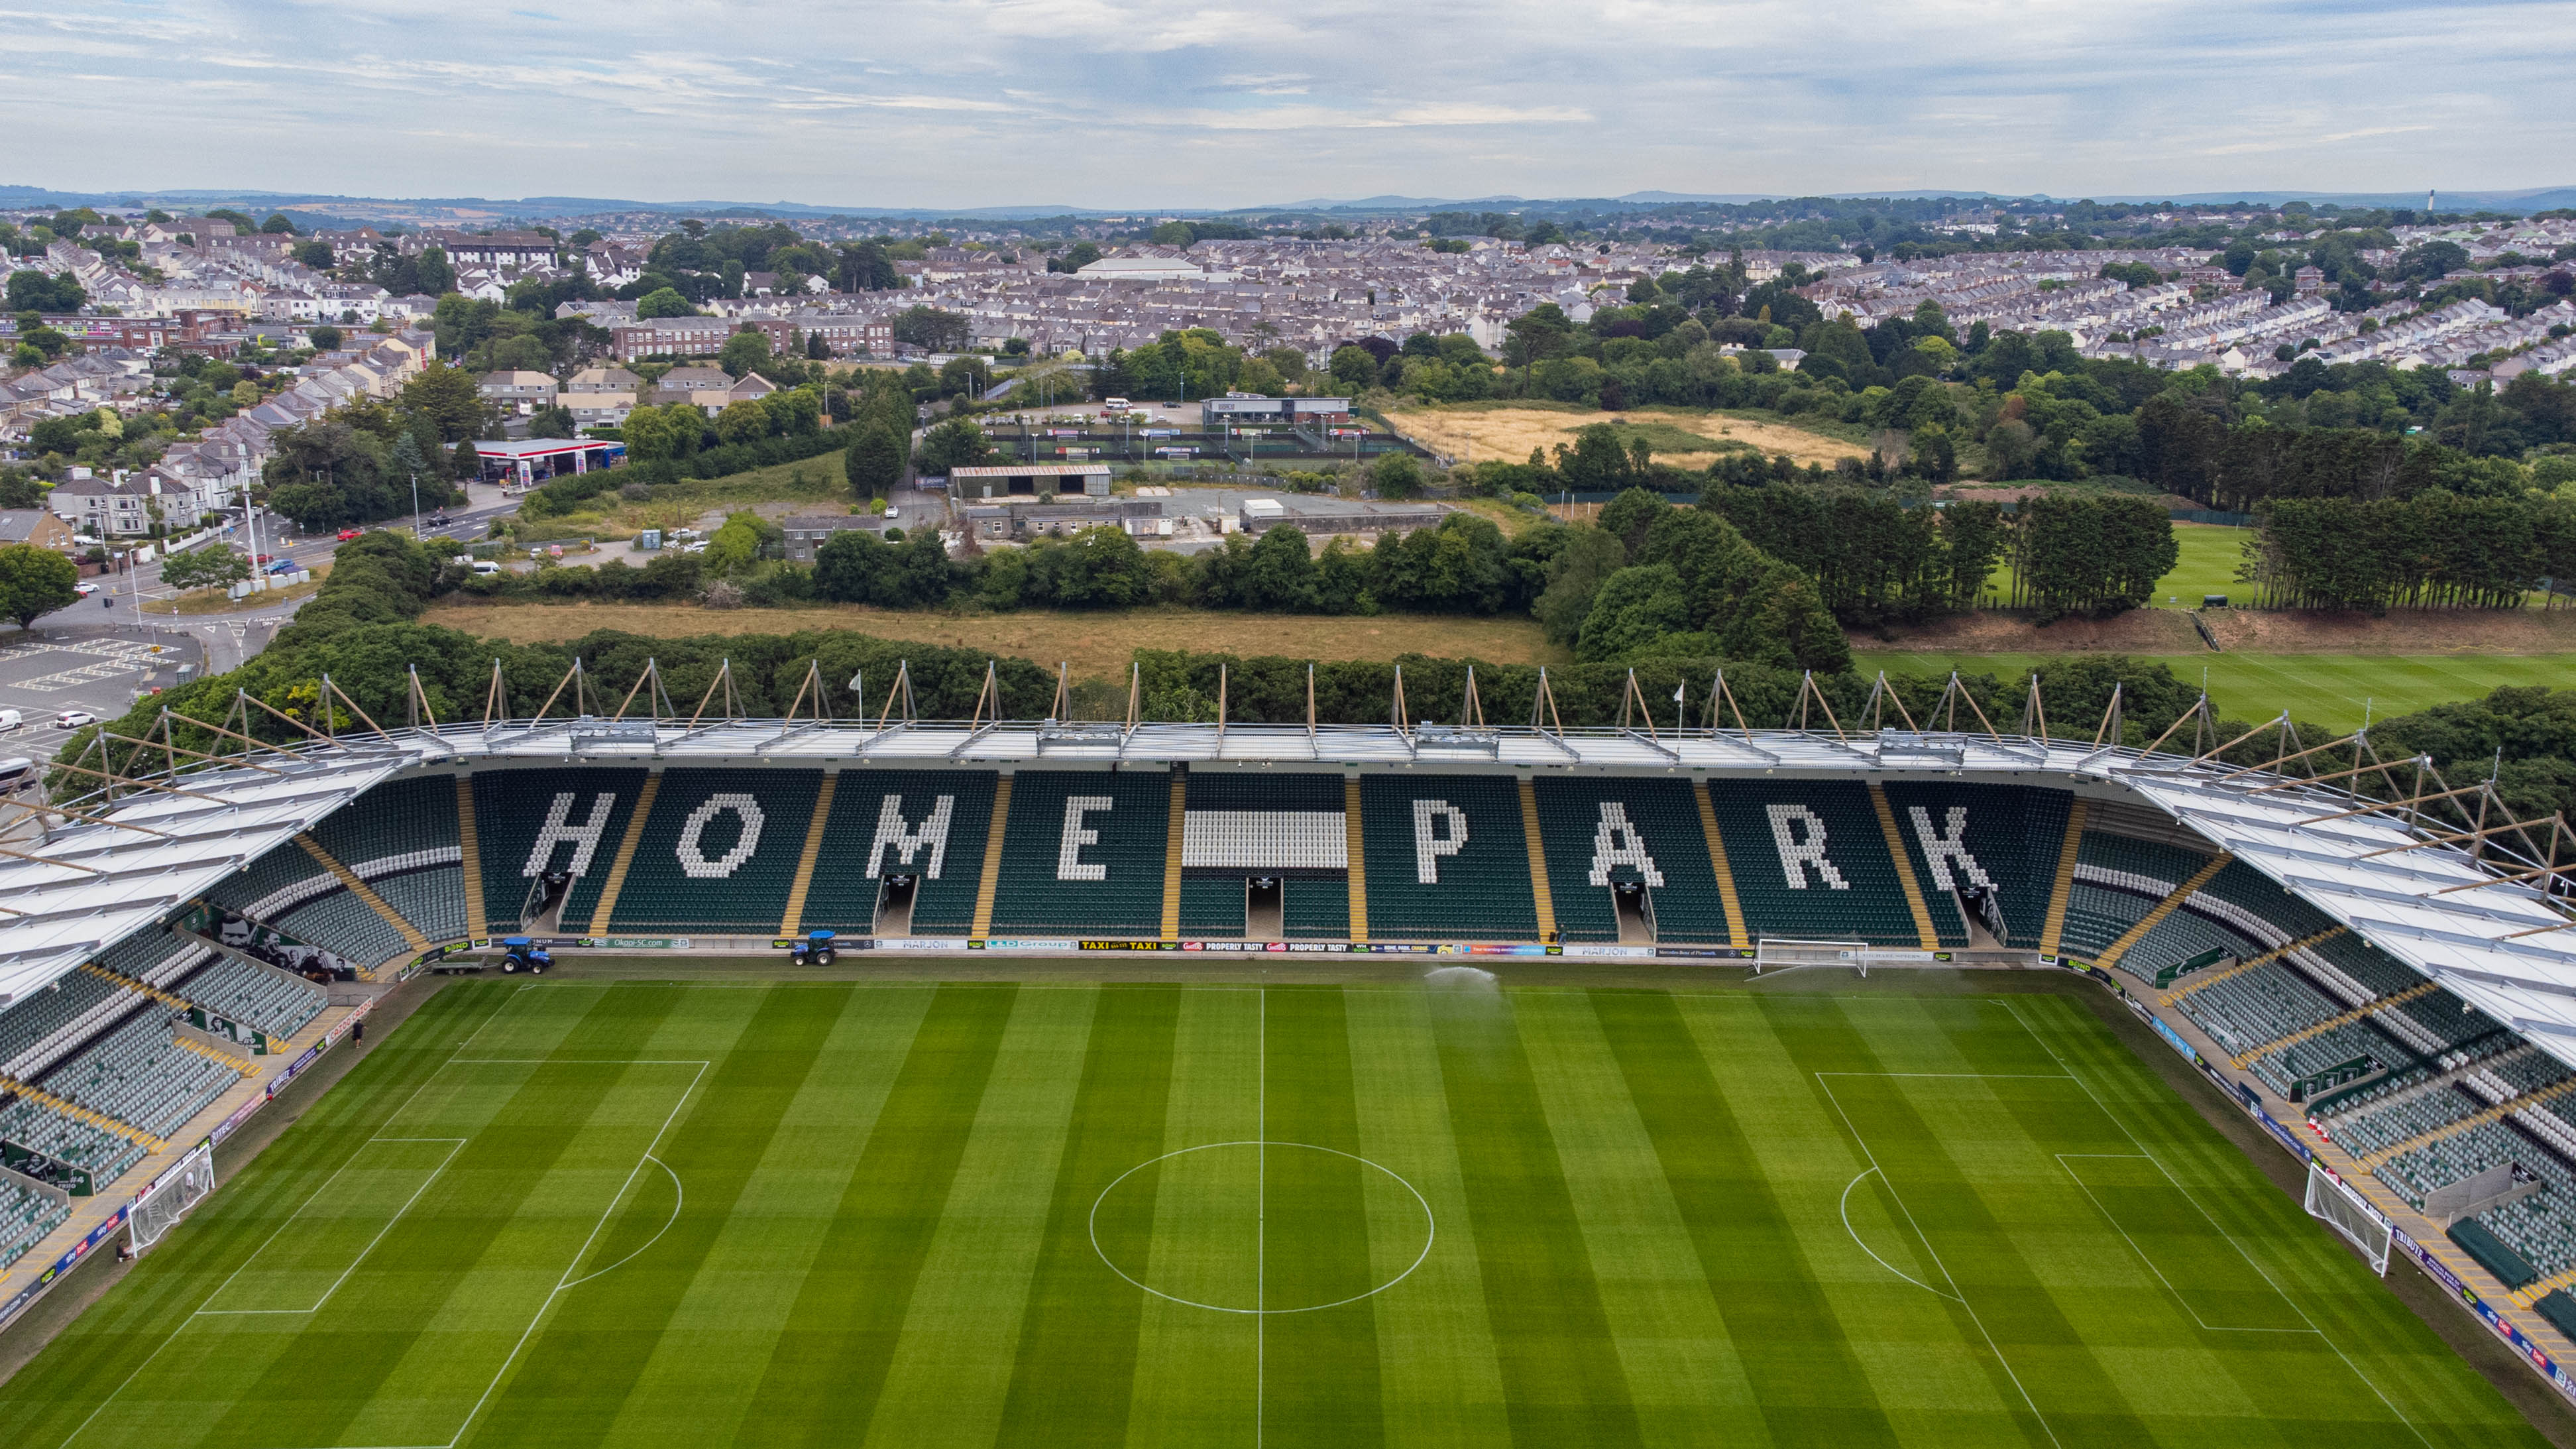 Home Park Stadium from above